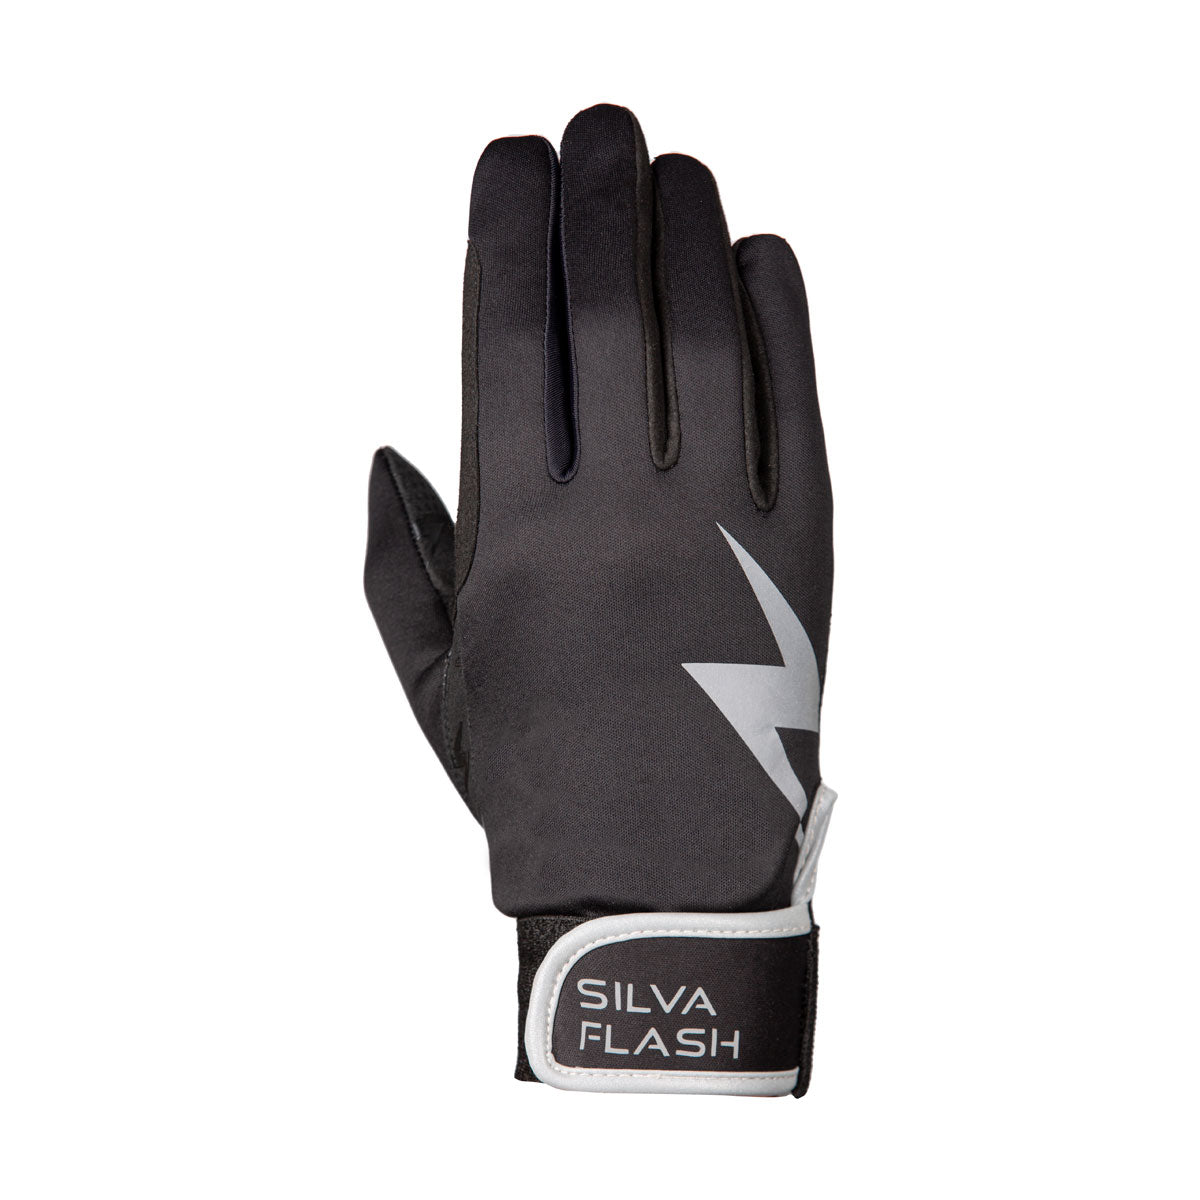 Hy Equestrian Silva Flash Riding Gloves By Hy Equestrian - Just Horse Riders